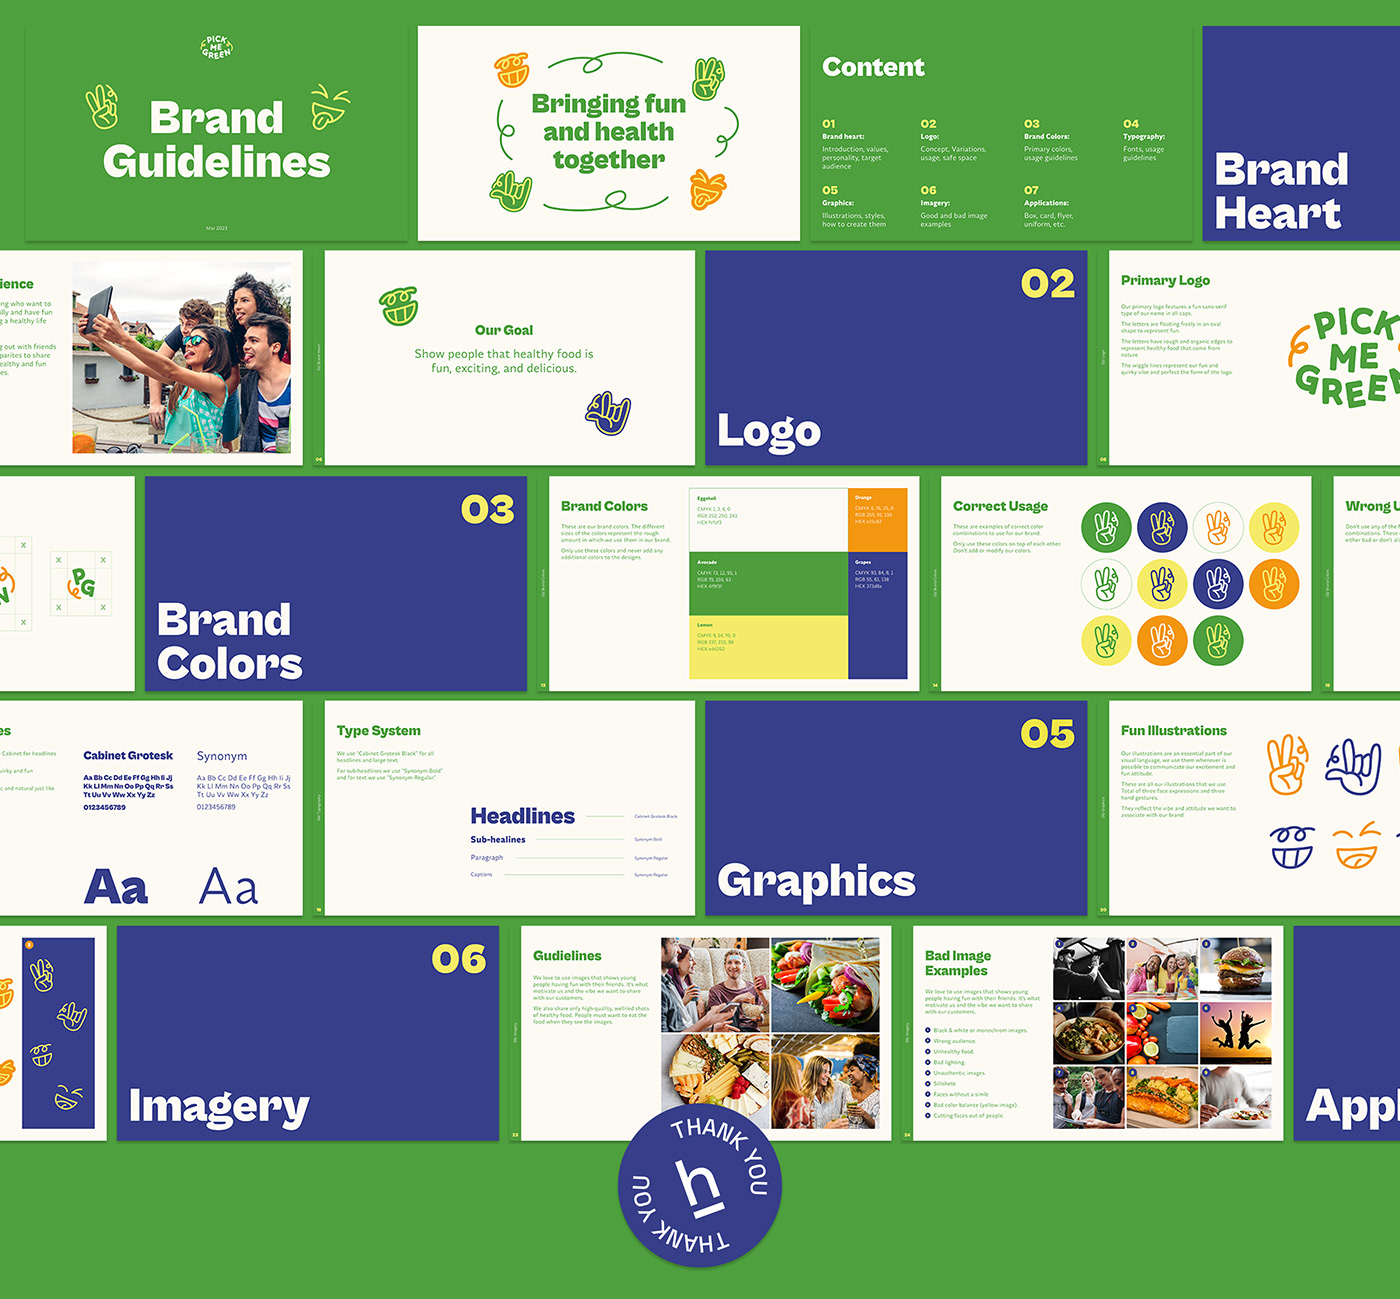 Brand guidelines manual for a healthy food brand